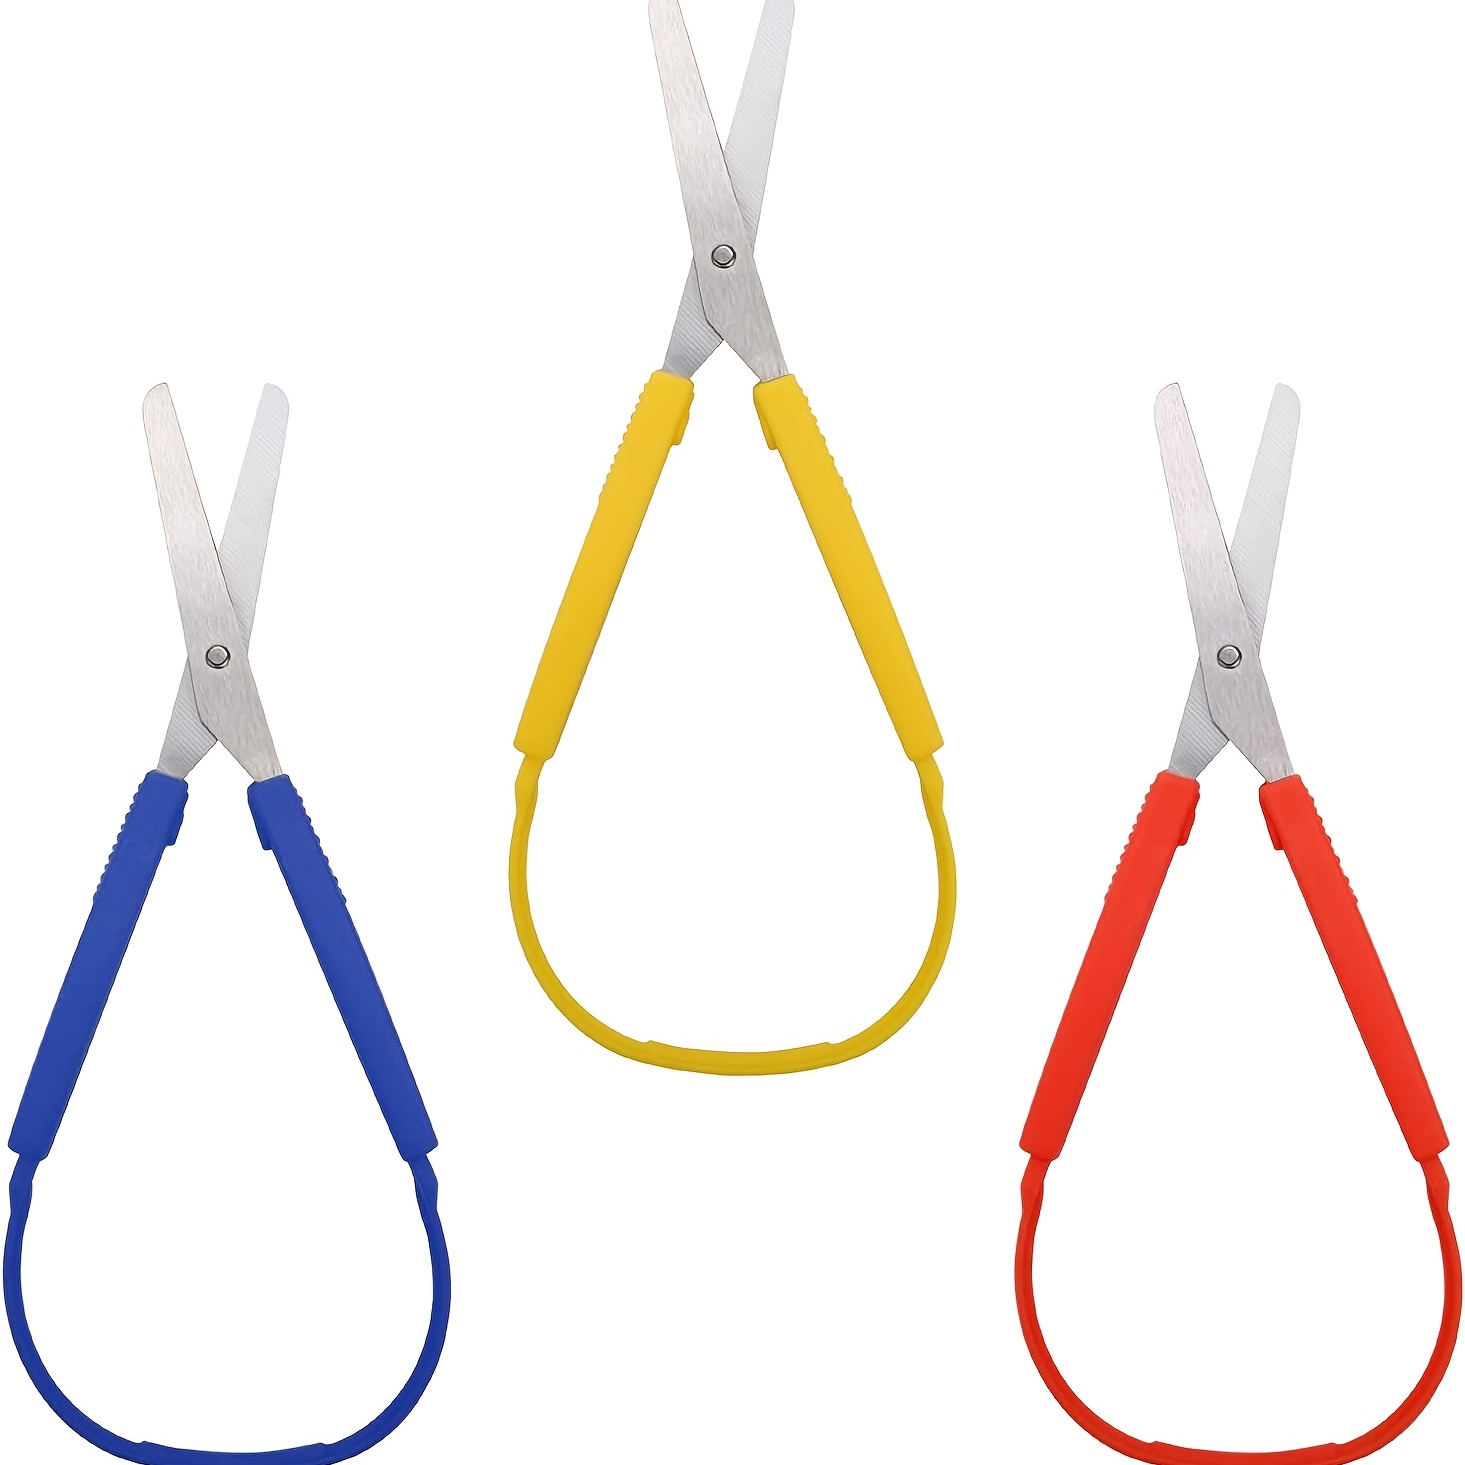 Large Loop Scissors for Teens and Adults 8 Inches (6-Pack)